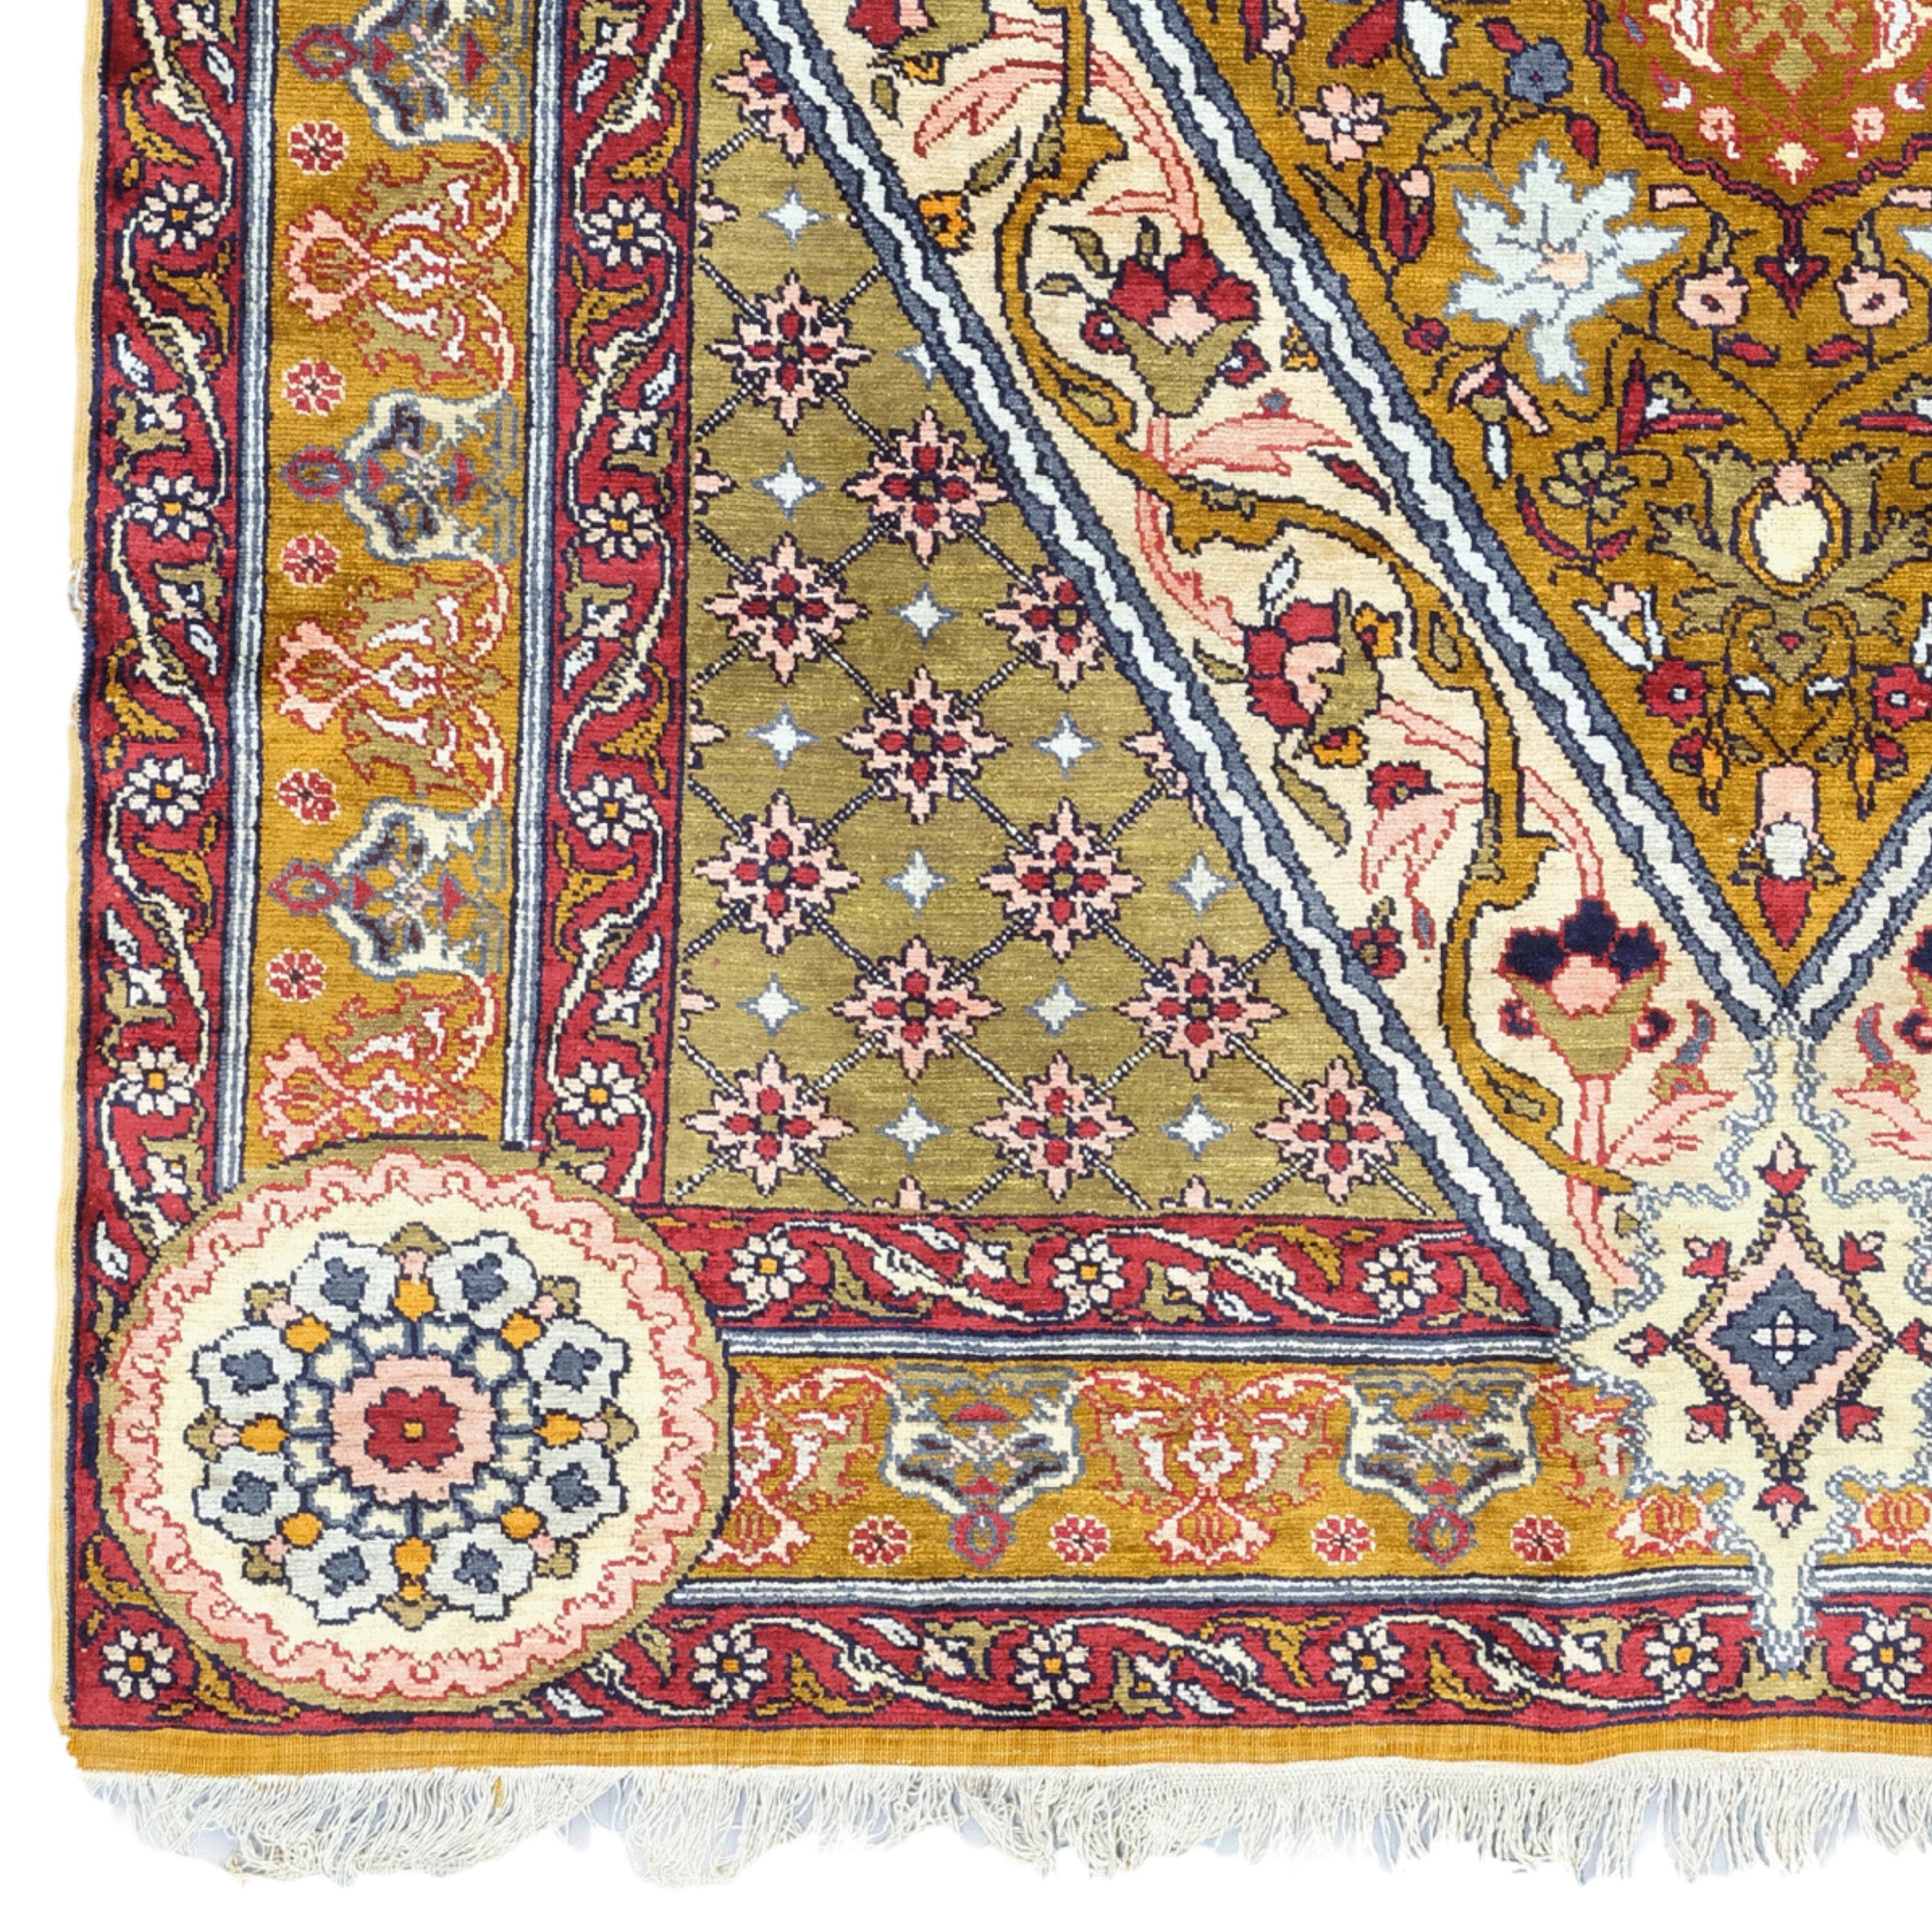 20th Century Sivas Silk Rug

Art Woven with the Elegance of Time This vintage silk Sivas carpet is a work of art woven with rich and deep colors from the early 20th century. The central medallion and surrounding floral motifs reflect the